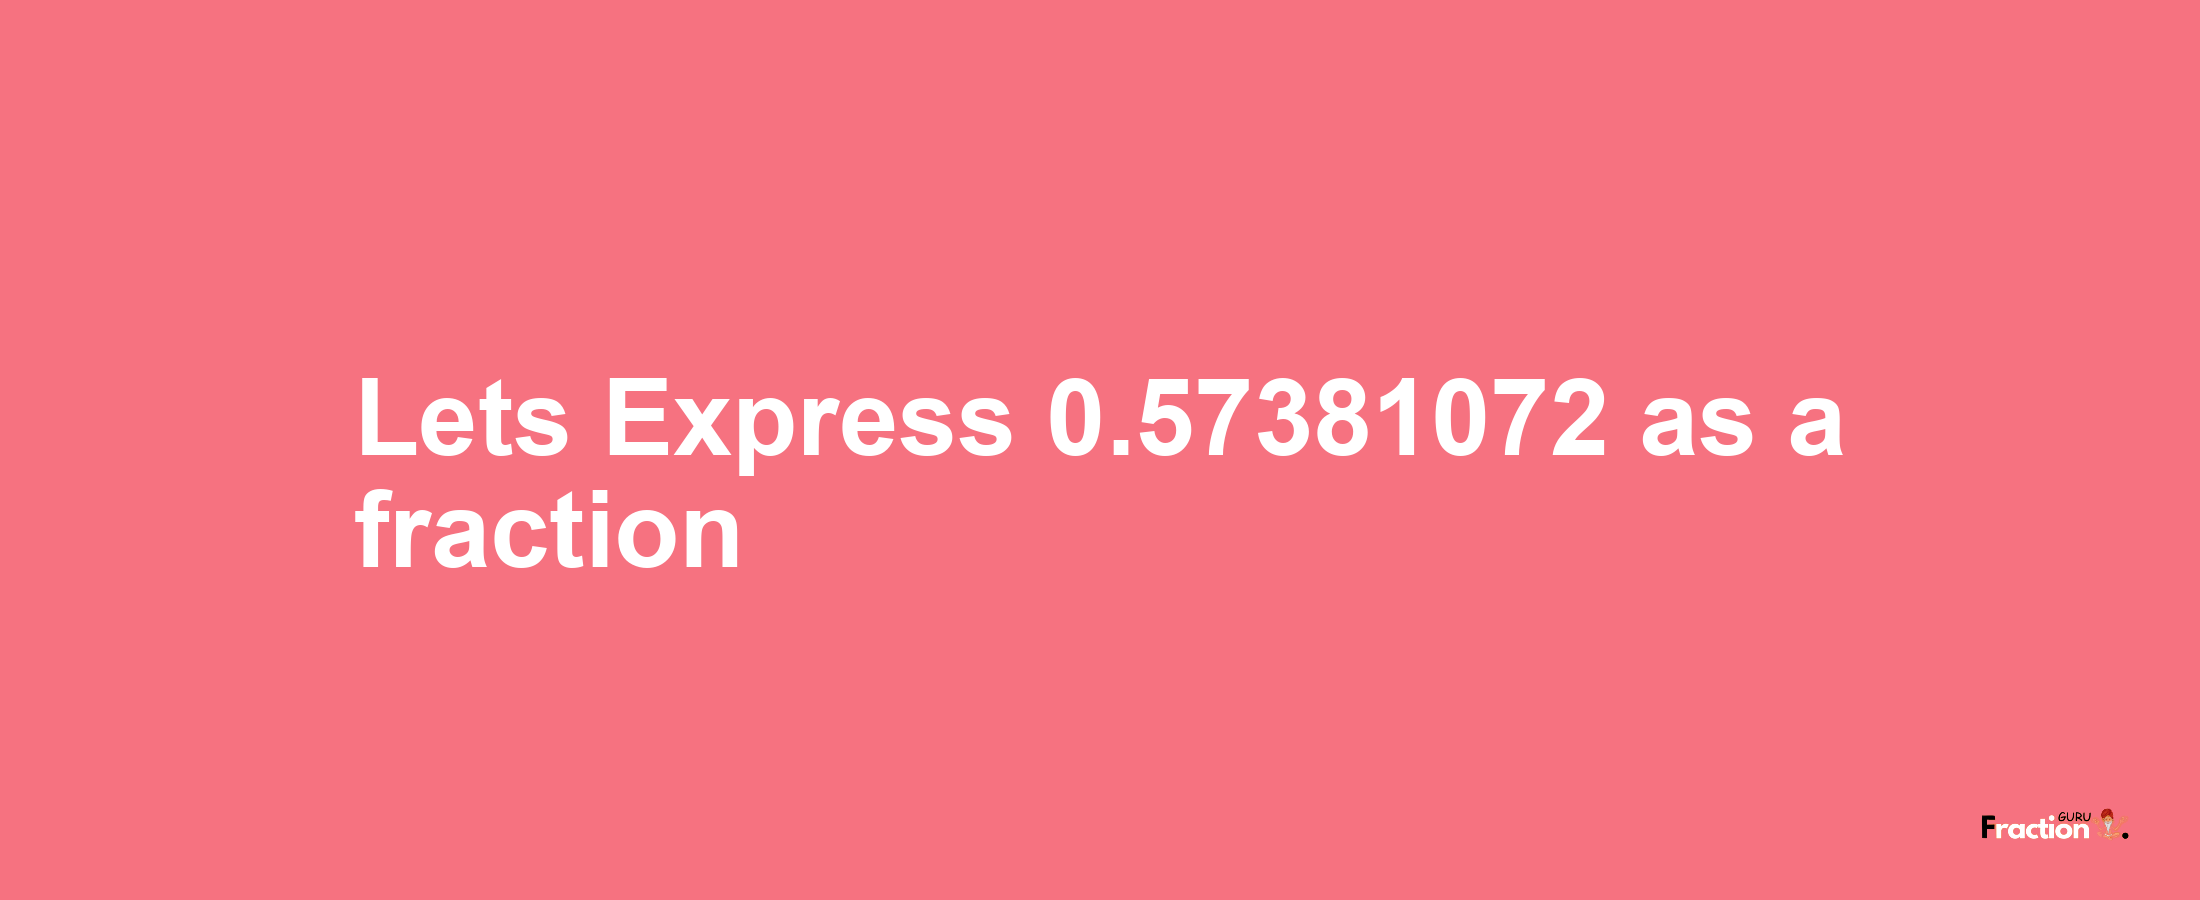 Lets Express 0.57381072 as afraction